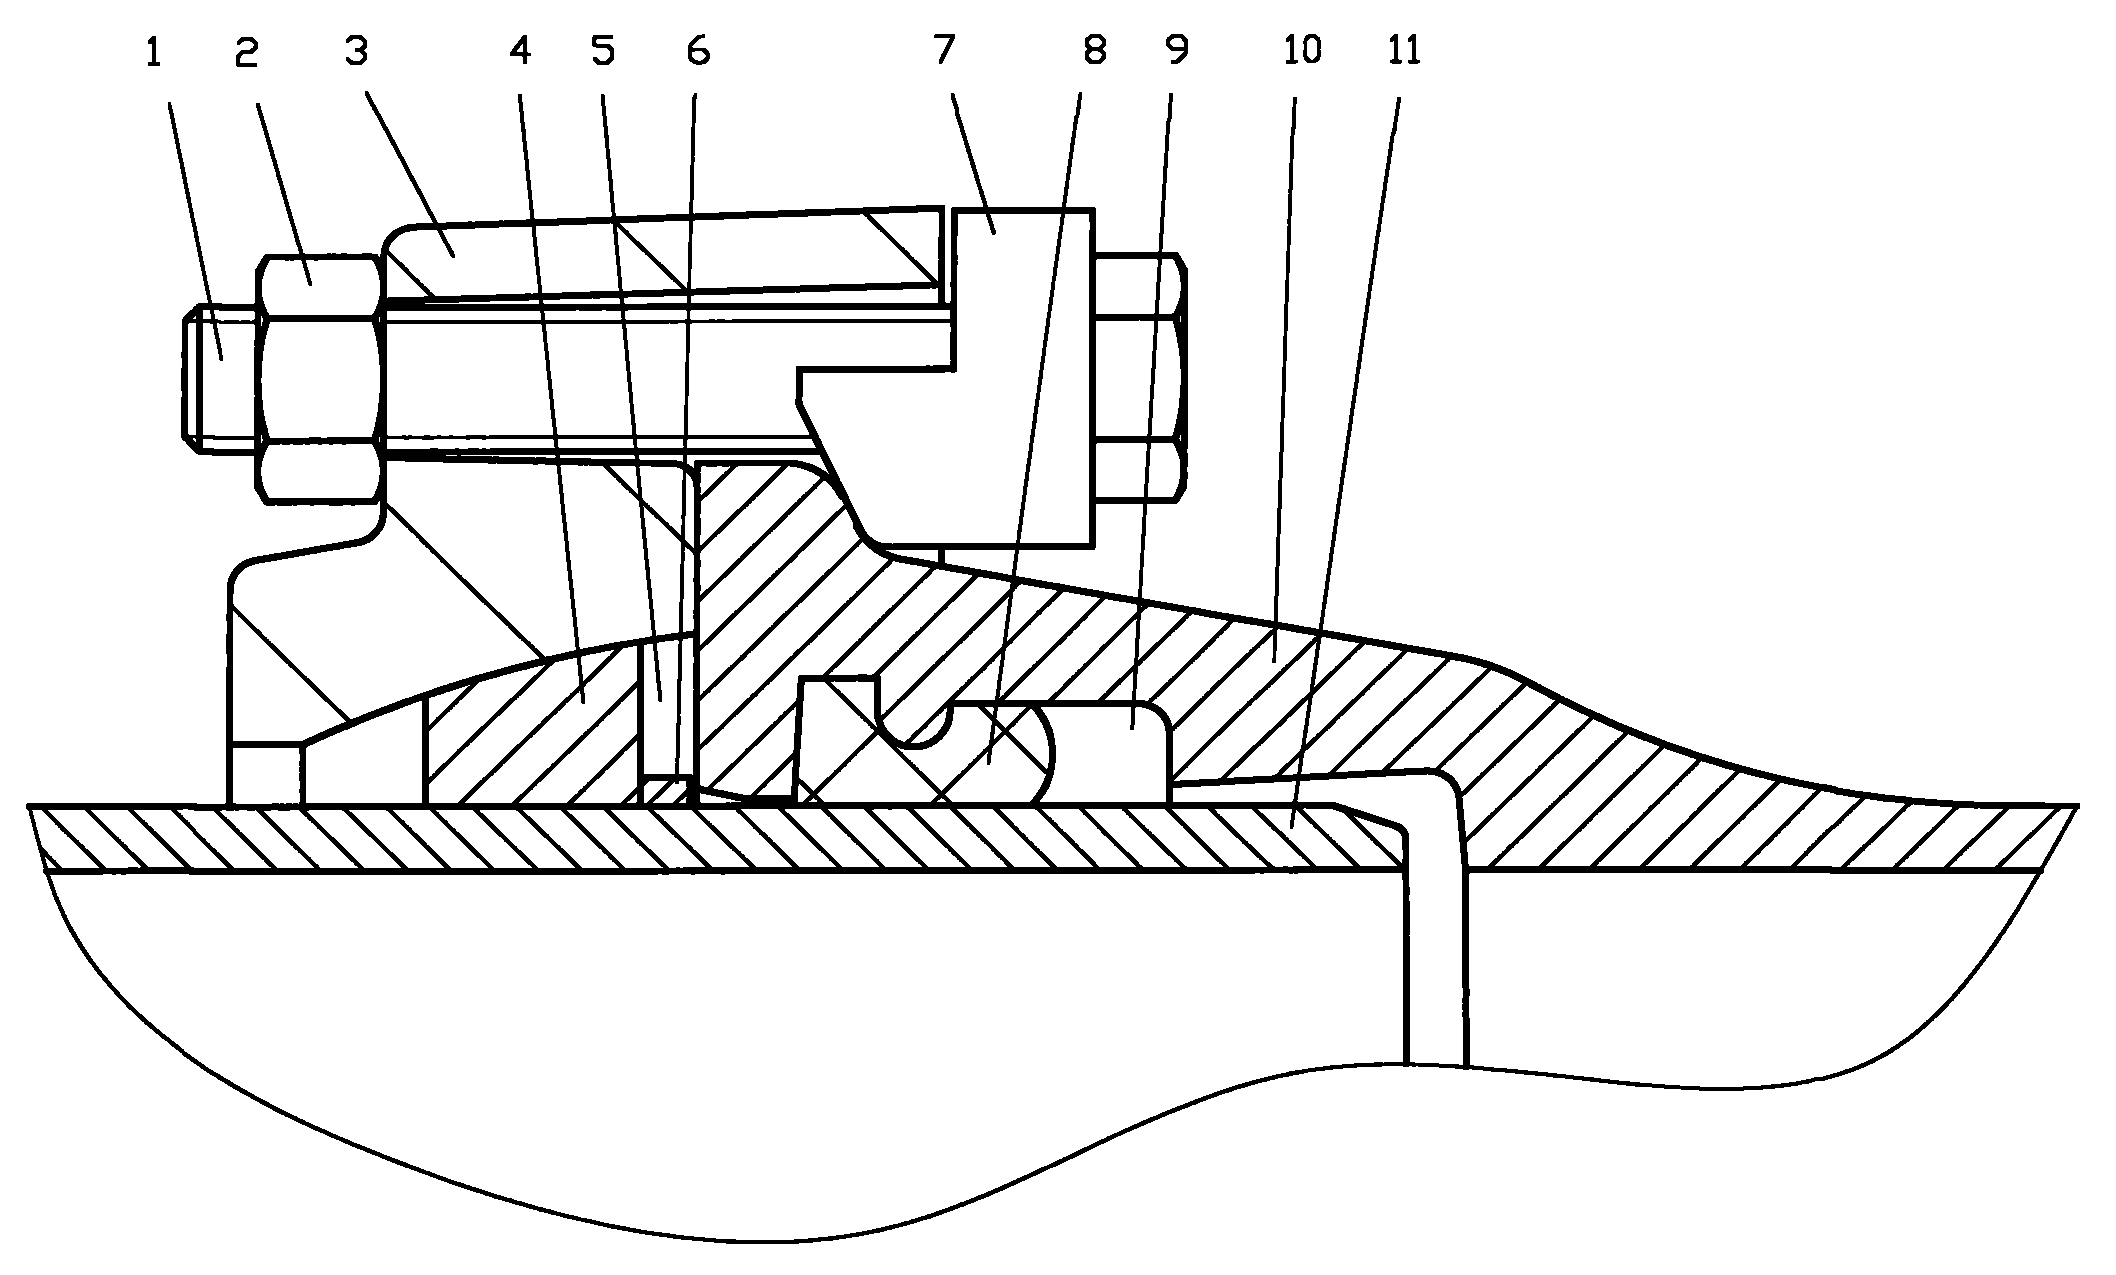 Self-anchoring port fixedly-connecting structure